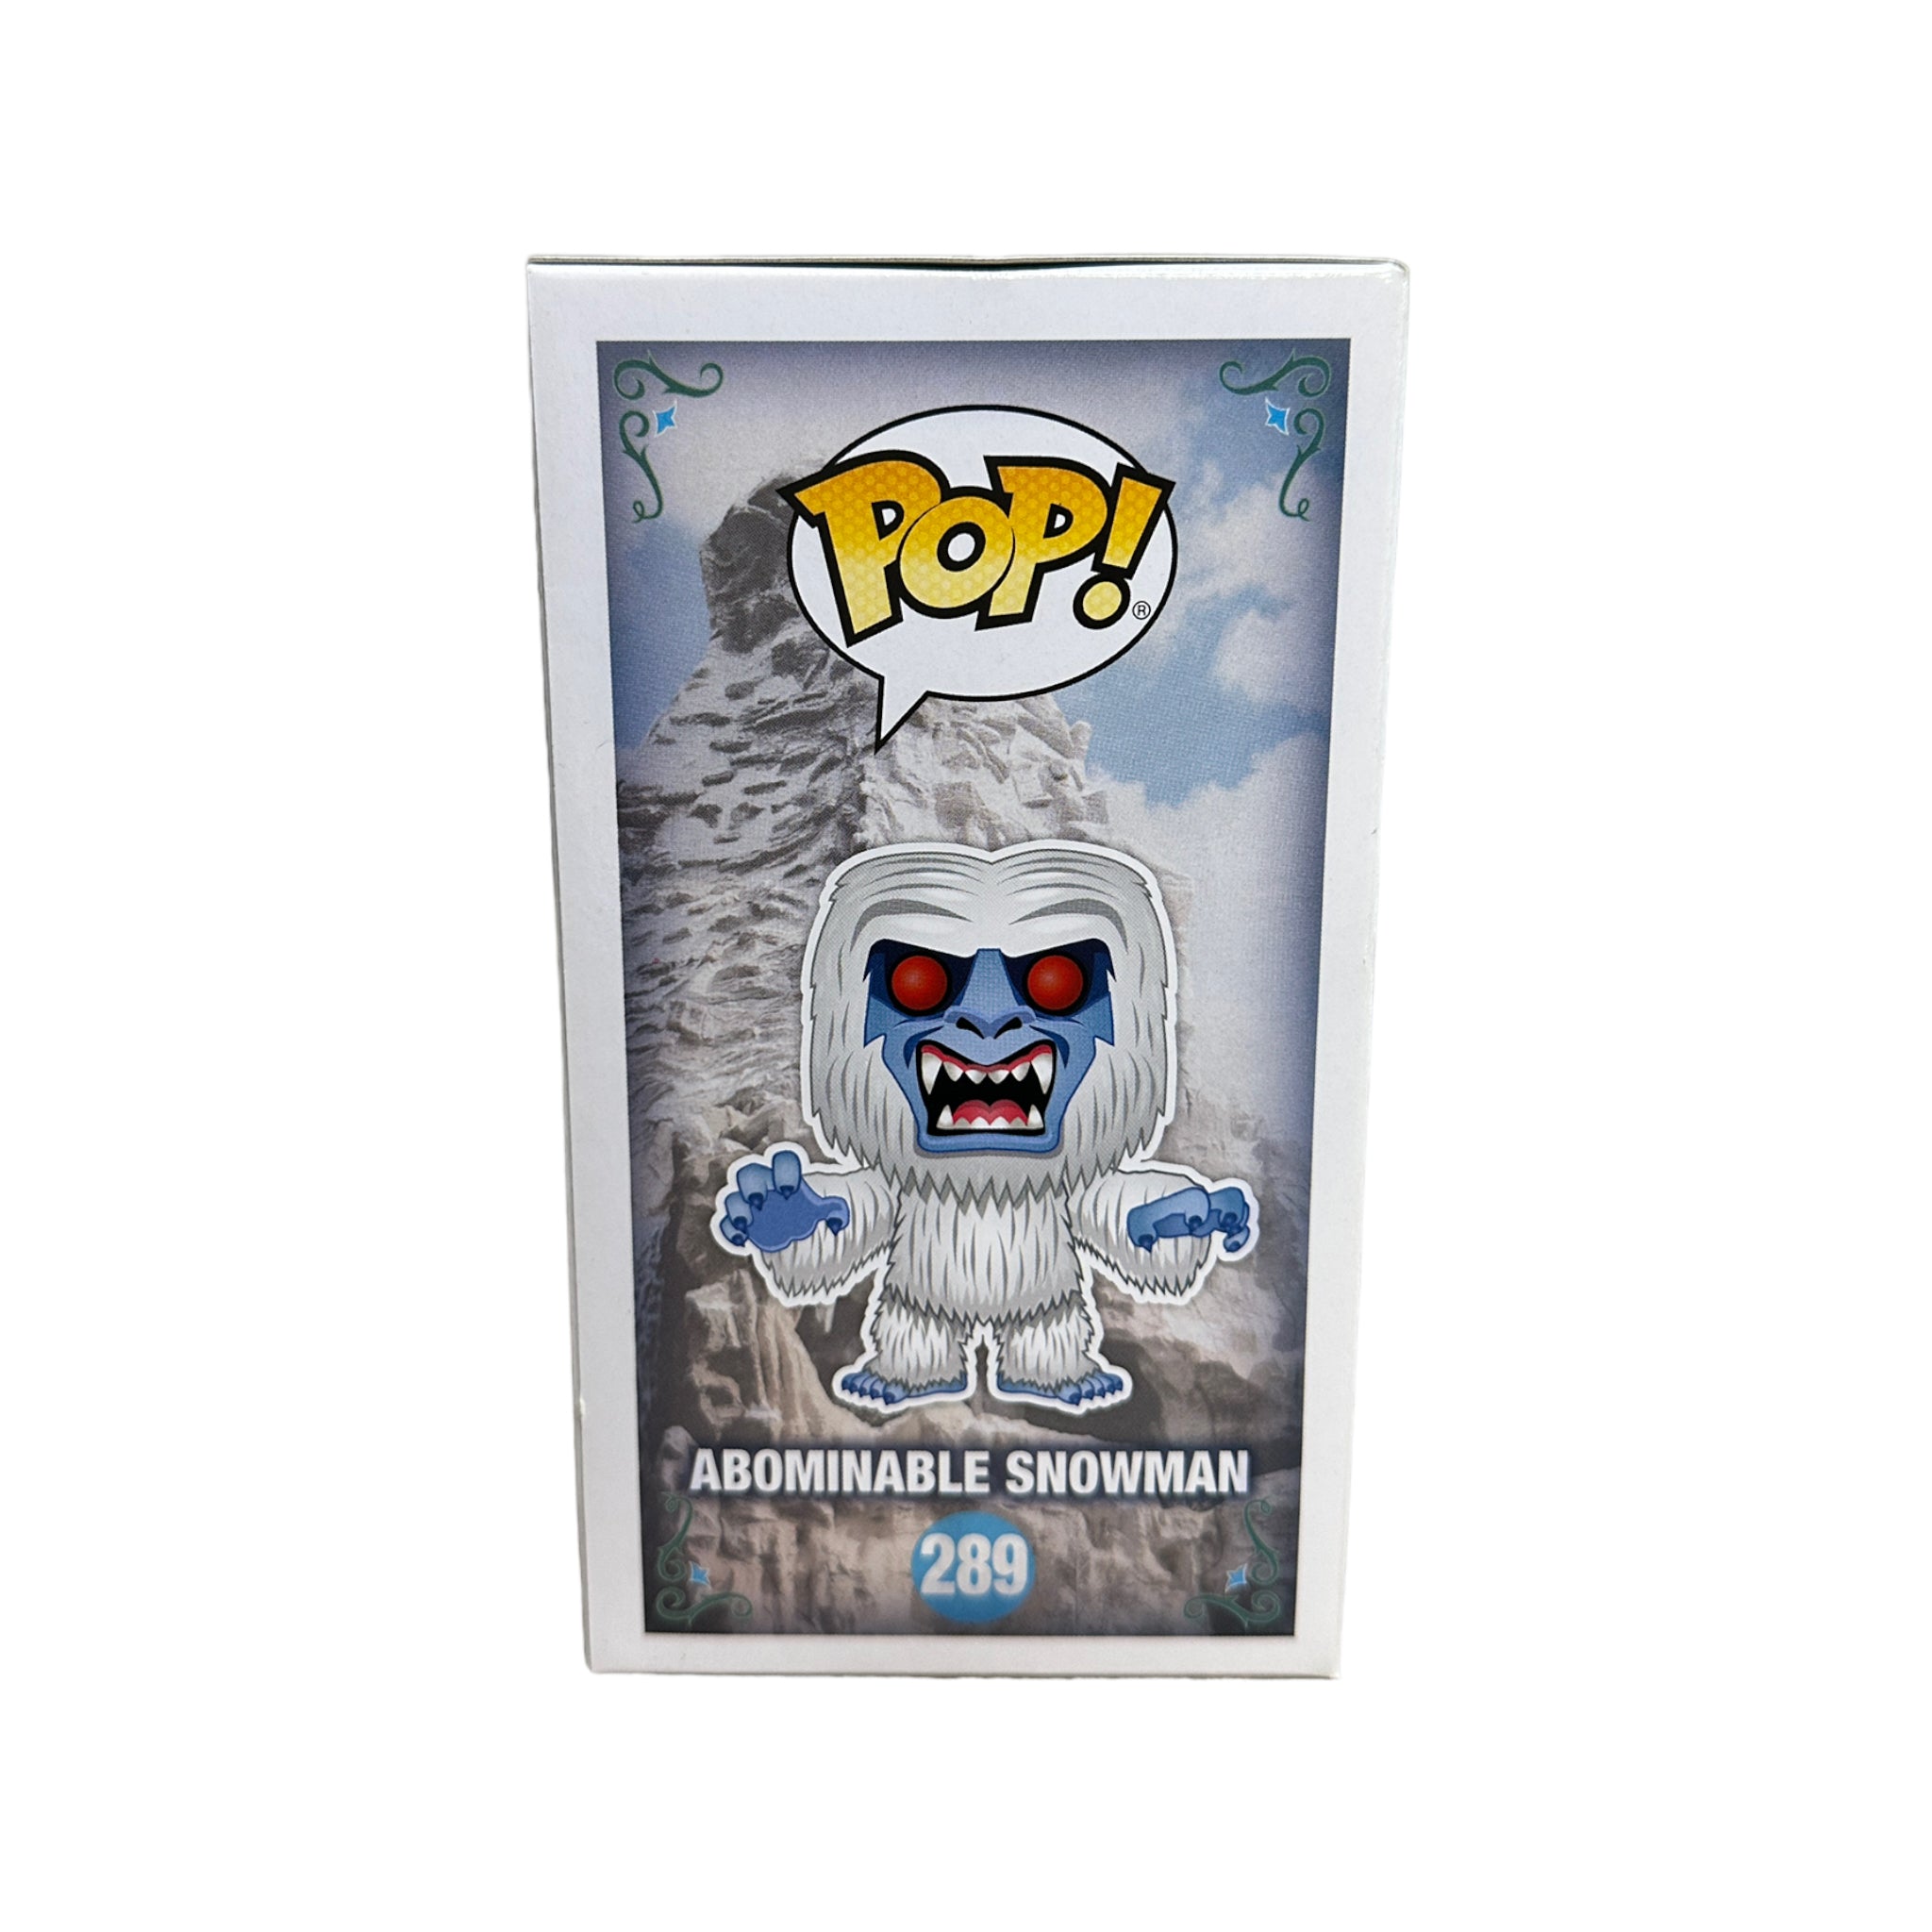 Abominable Snowman #289 (Diamond Collection) Funko Pop! - Matterhorn Bobsled - Disney Parks Exclusive - Condition 8.5/10